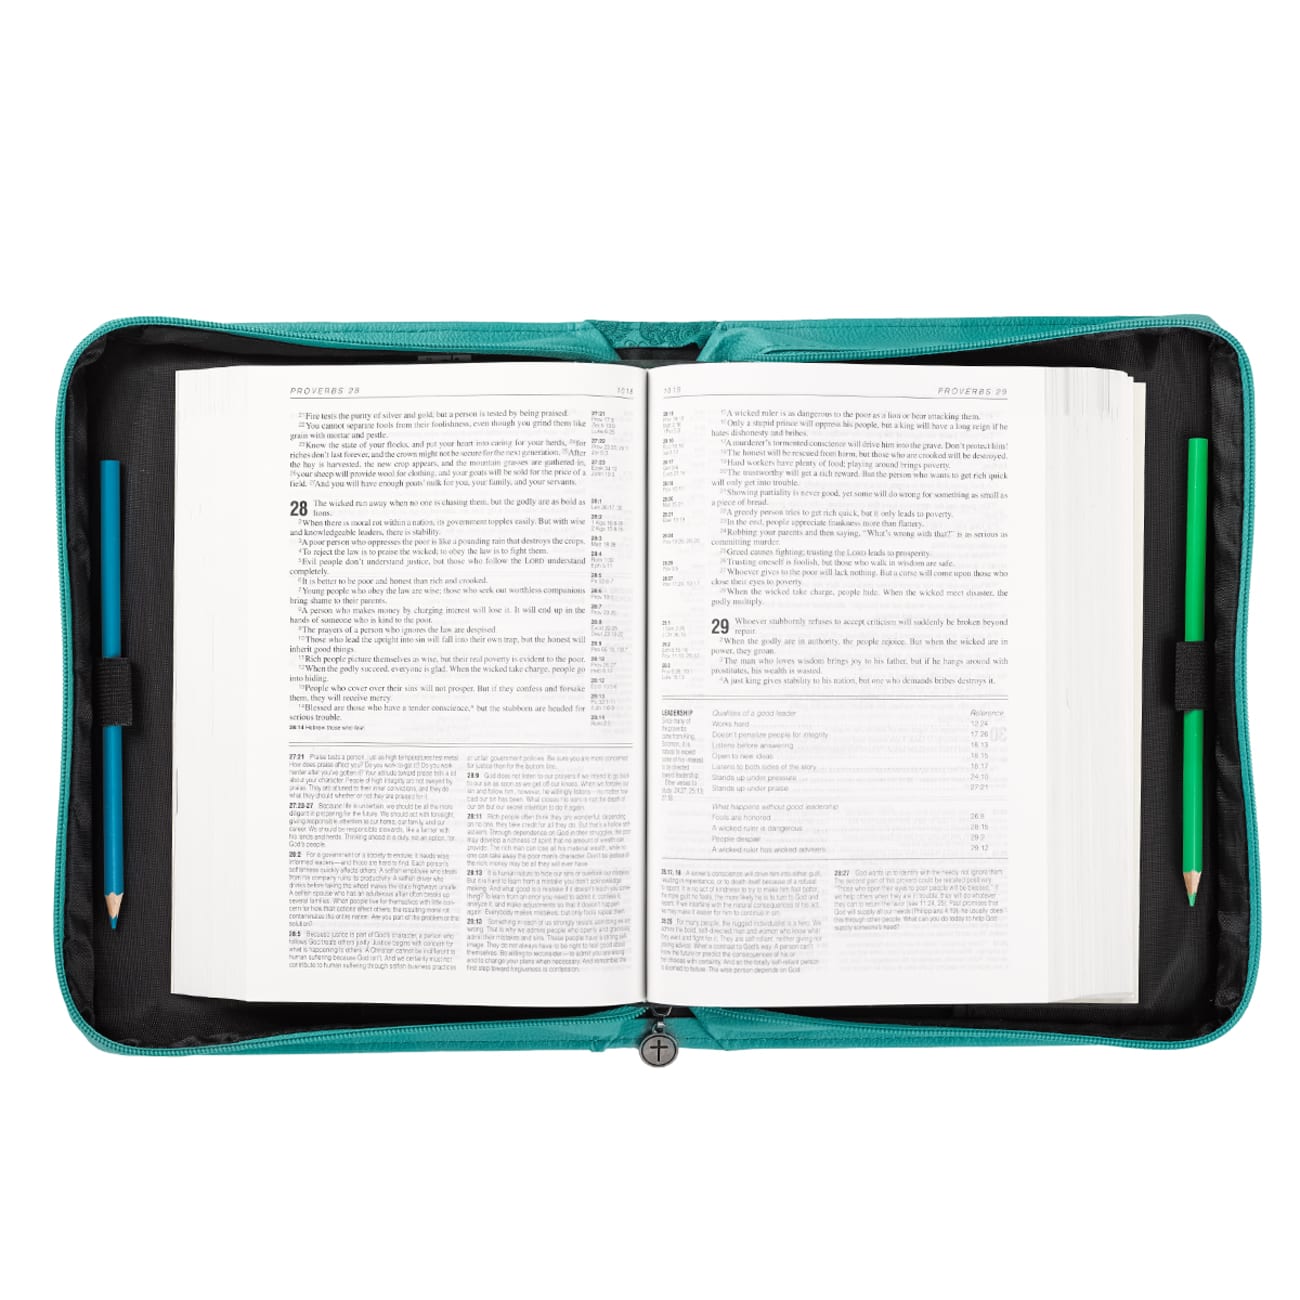 Bible Cover Everlasting Love Jer. 31: 3 Large Turquoise Fashion Trendy Luxleather Bible Cover